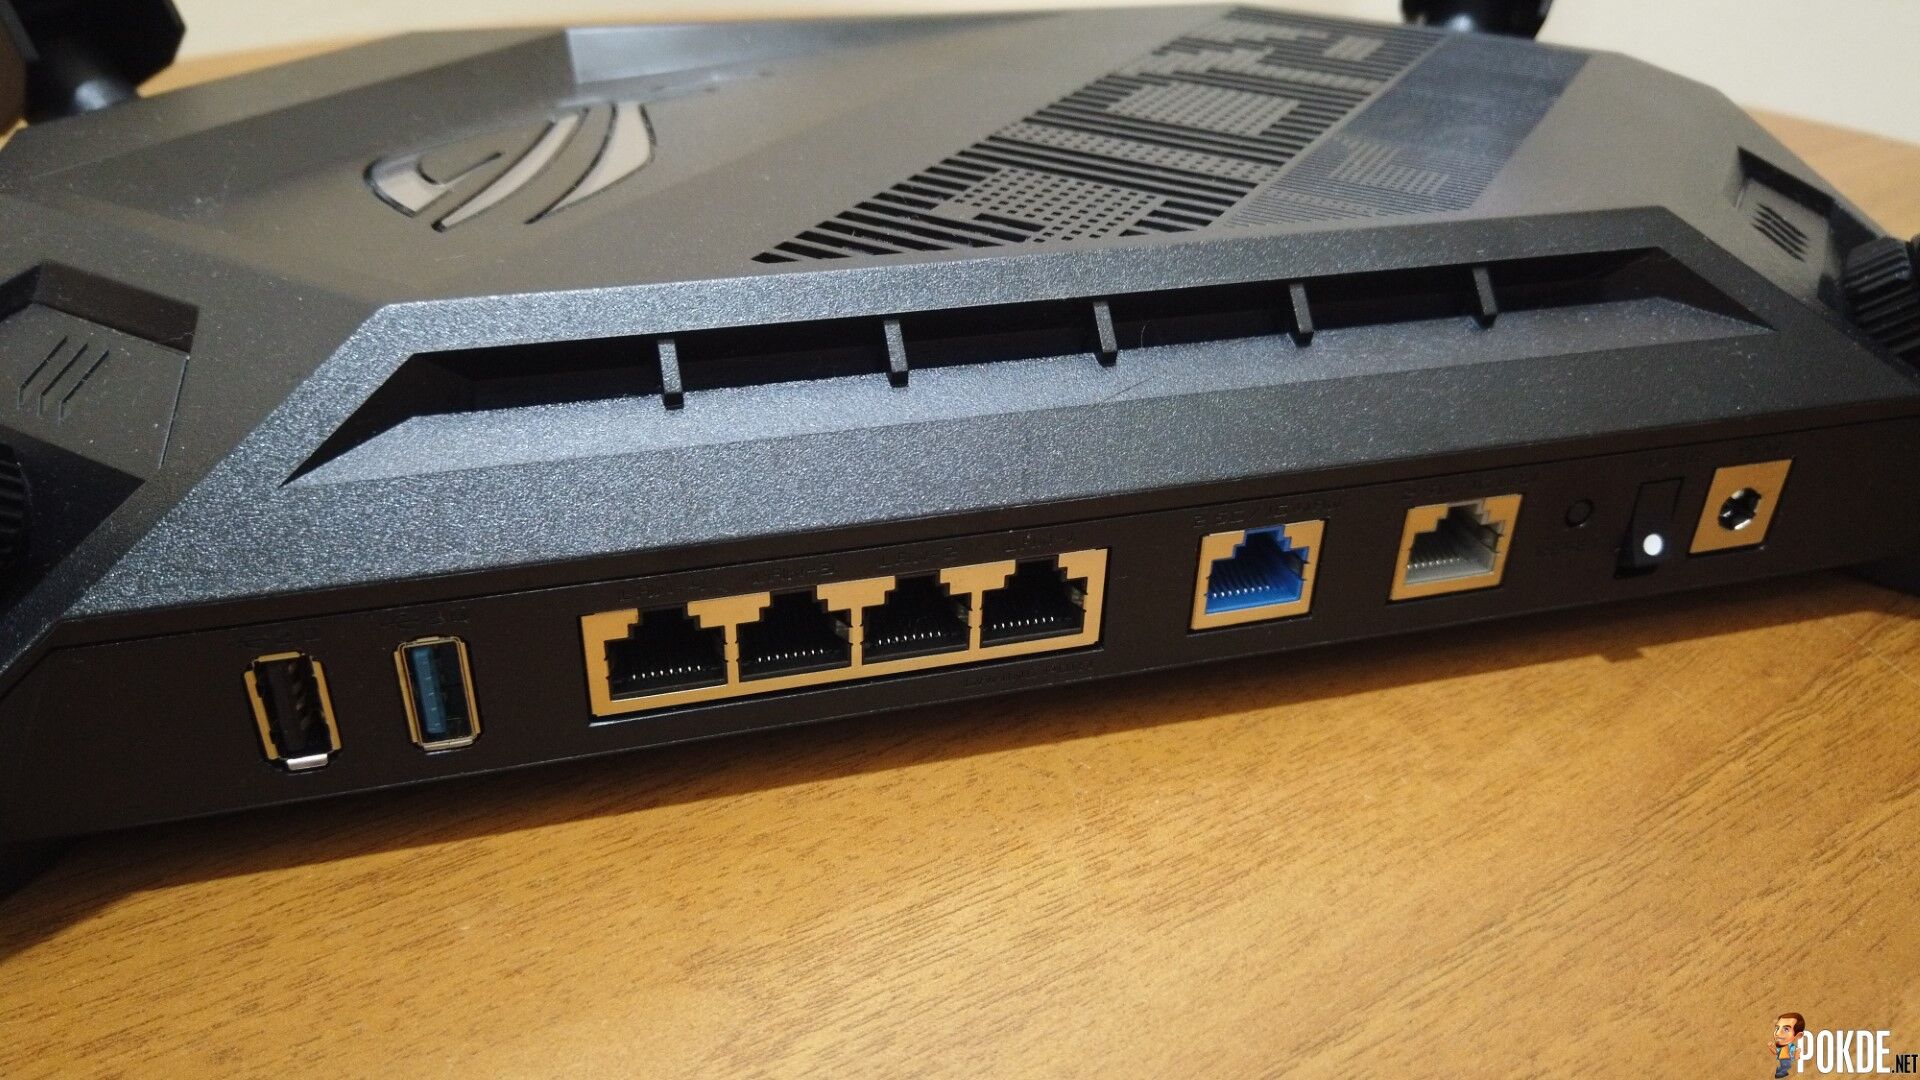 ASUS ROG Rapture GT-AX6000 Review Fast and Secure , you will never get Lag with this Router. 26